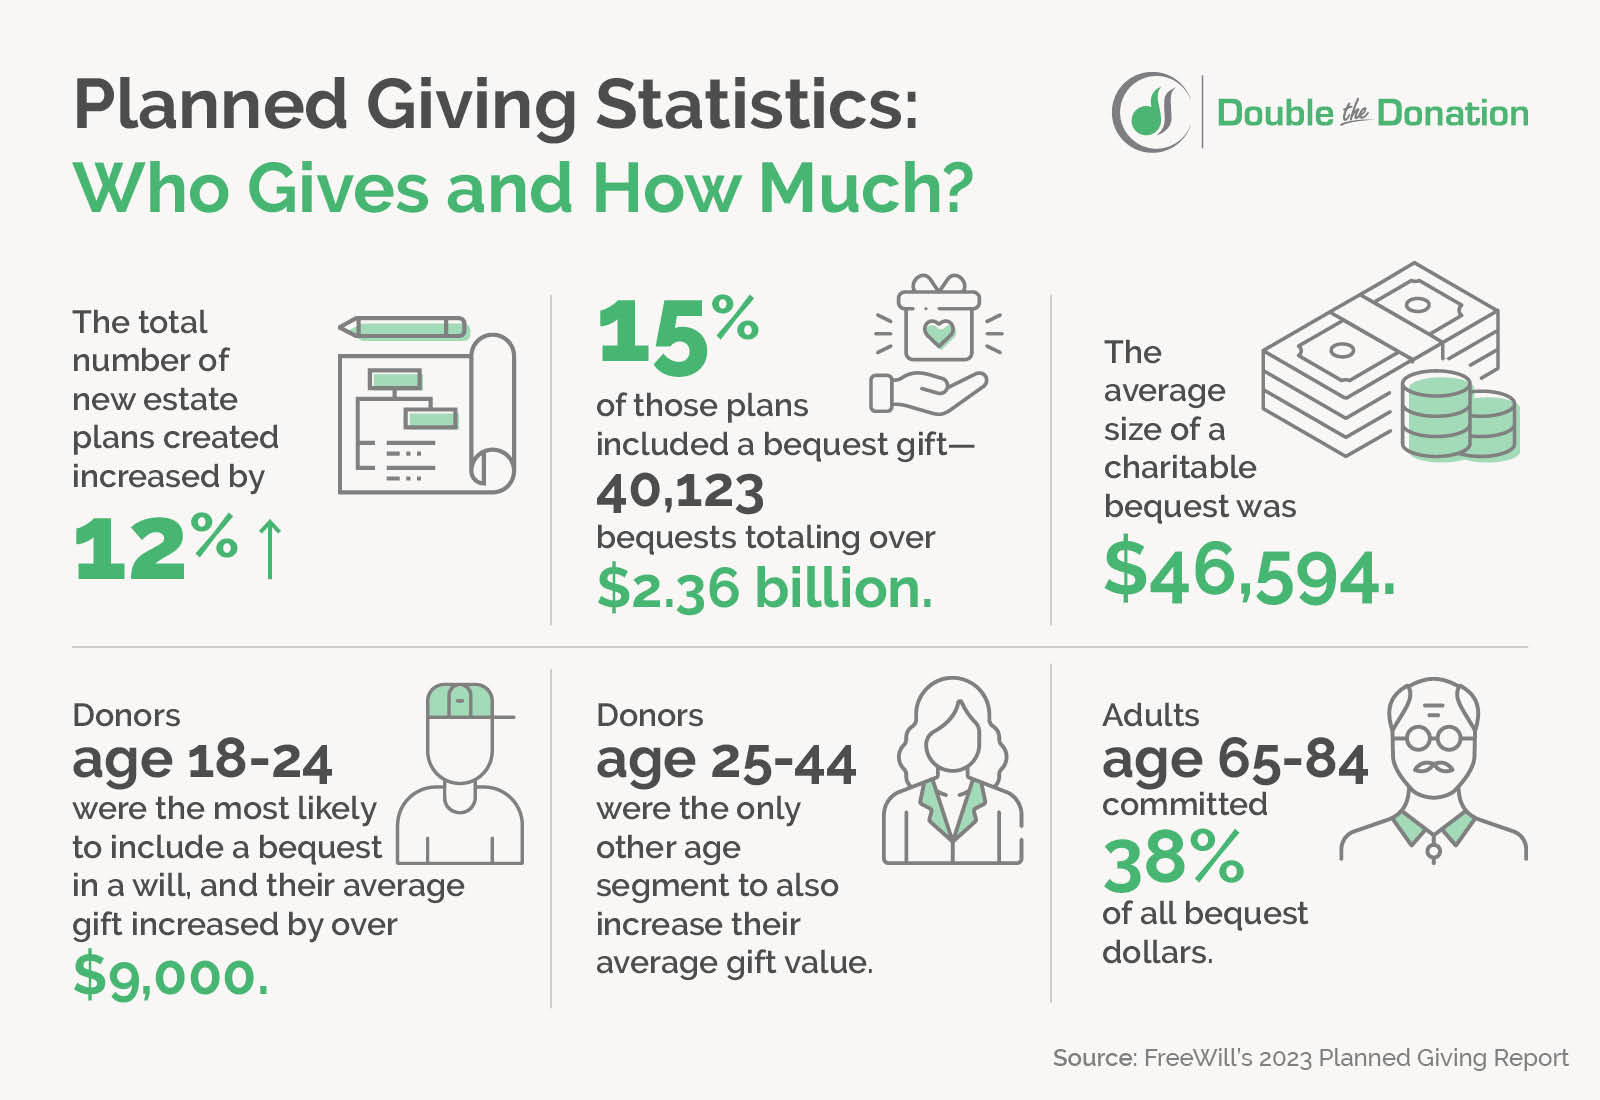 These statistics, detailed below, illustrate the growth of planned giving among different age cohorts in recent years.